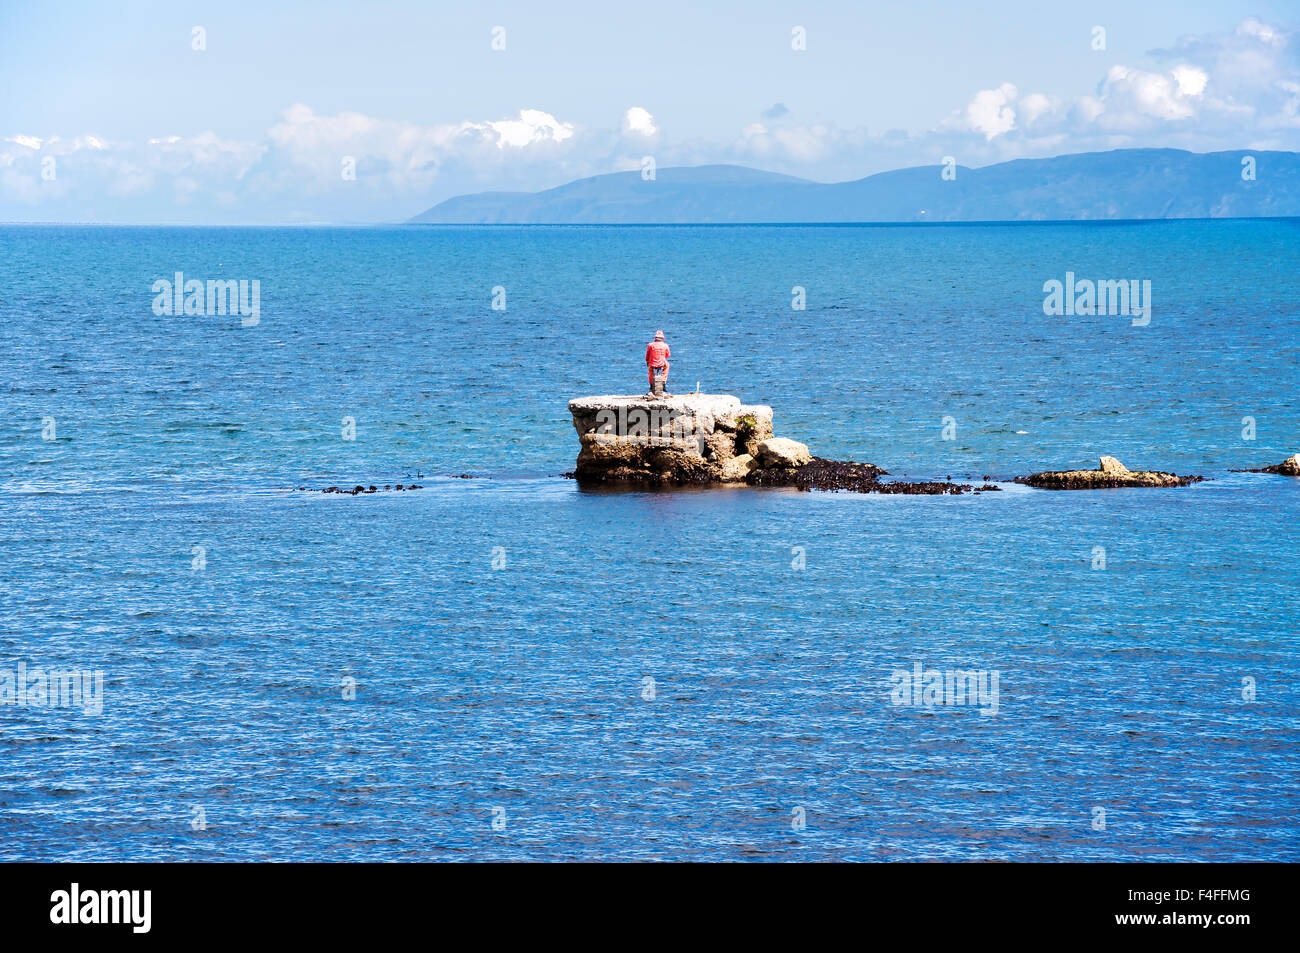 Angling in the sea, from a tiny rocky island in Norther Ireland Stock Photo